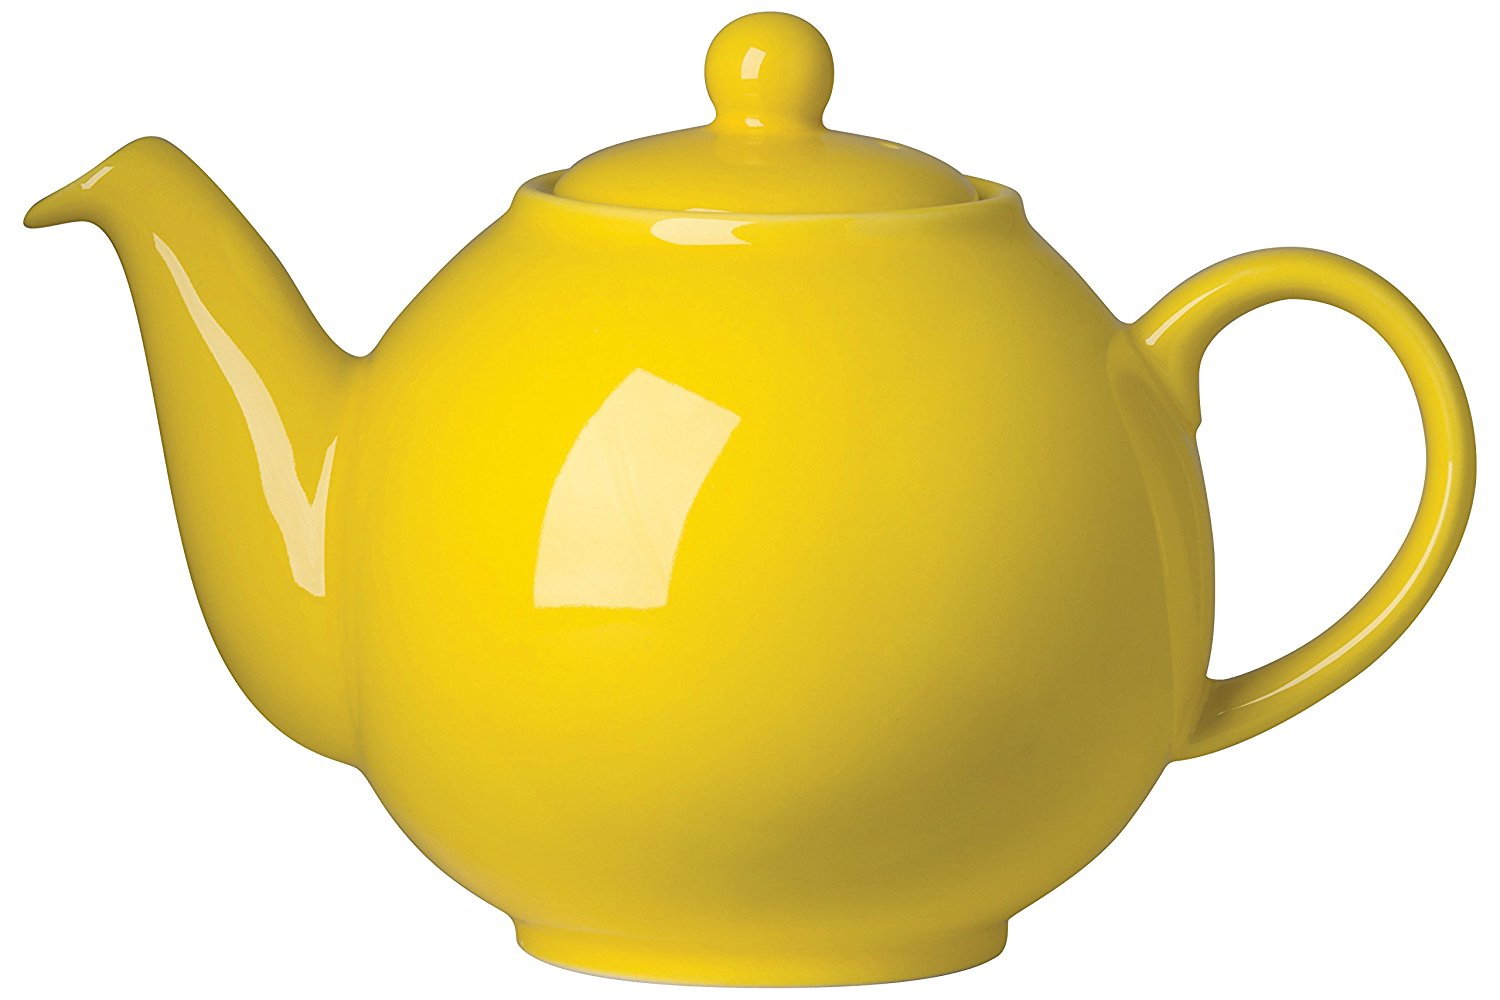 Pouring Teapot Cliparts  Free download best Pouring Teapot Cliparts on ClipArtMag.com